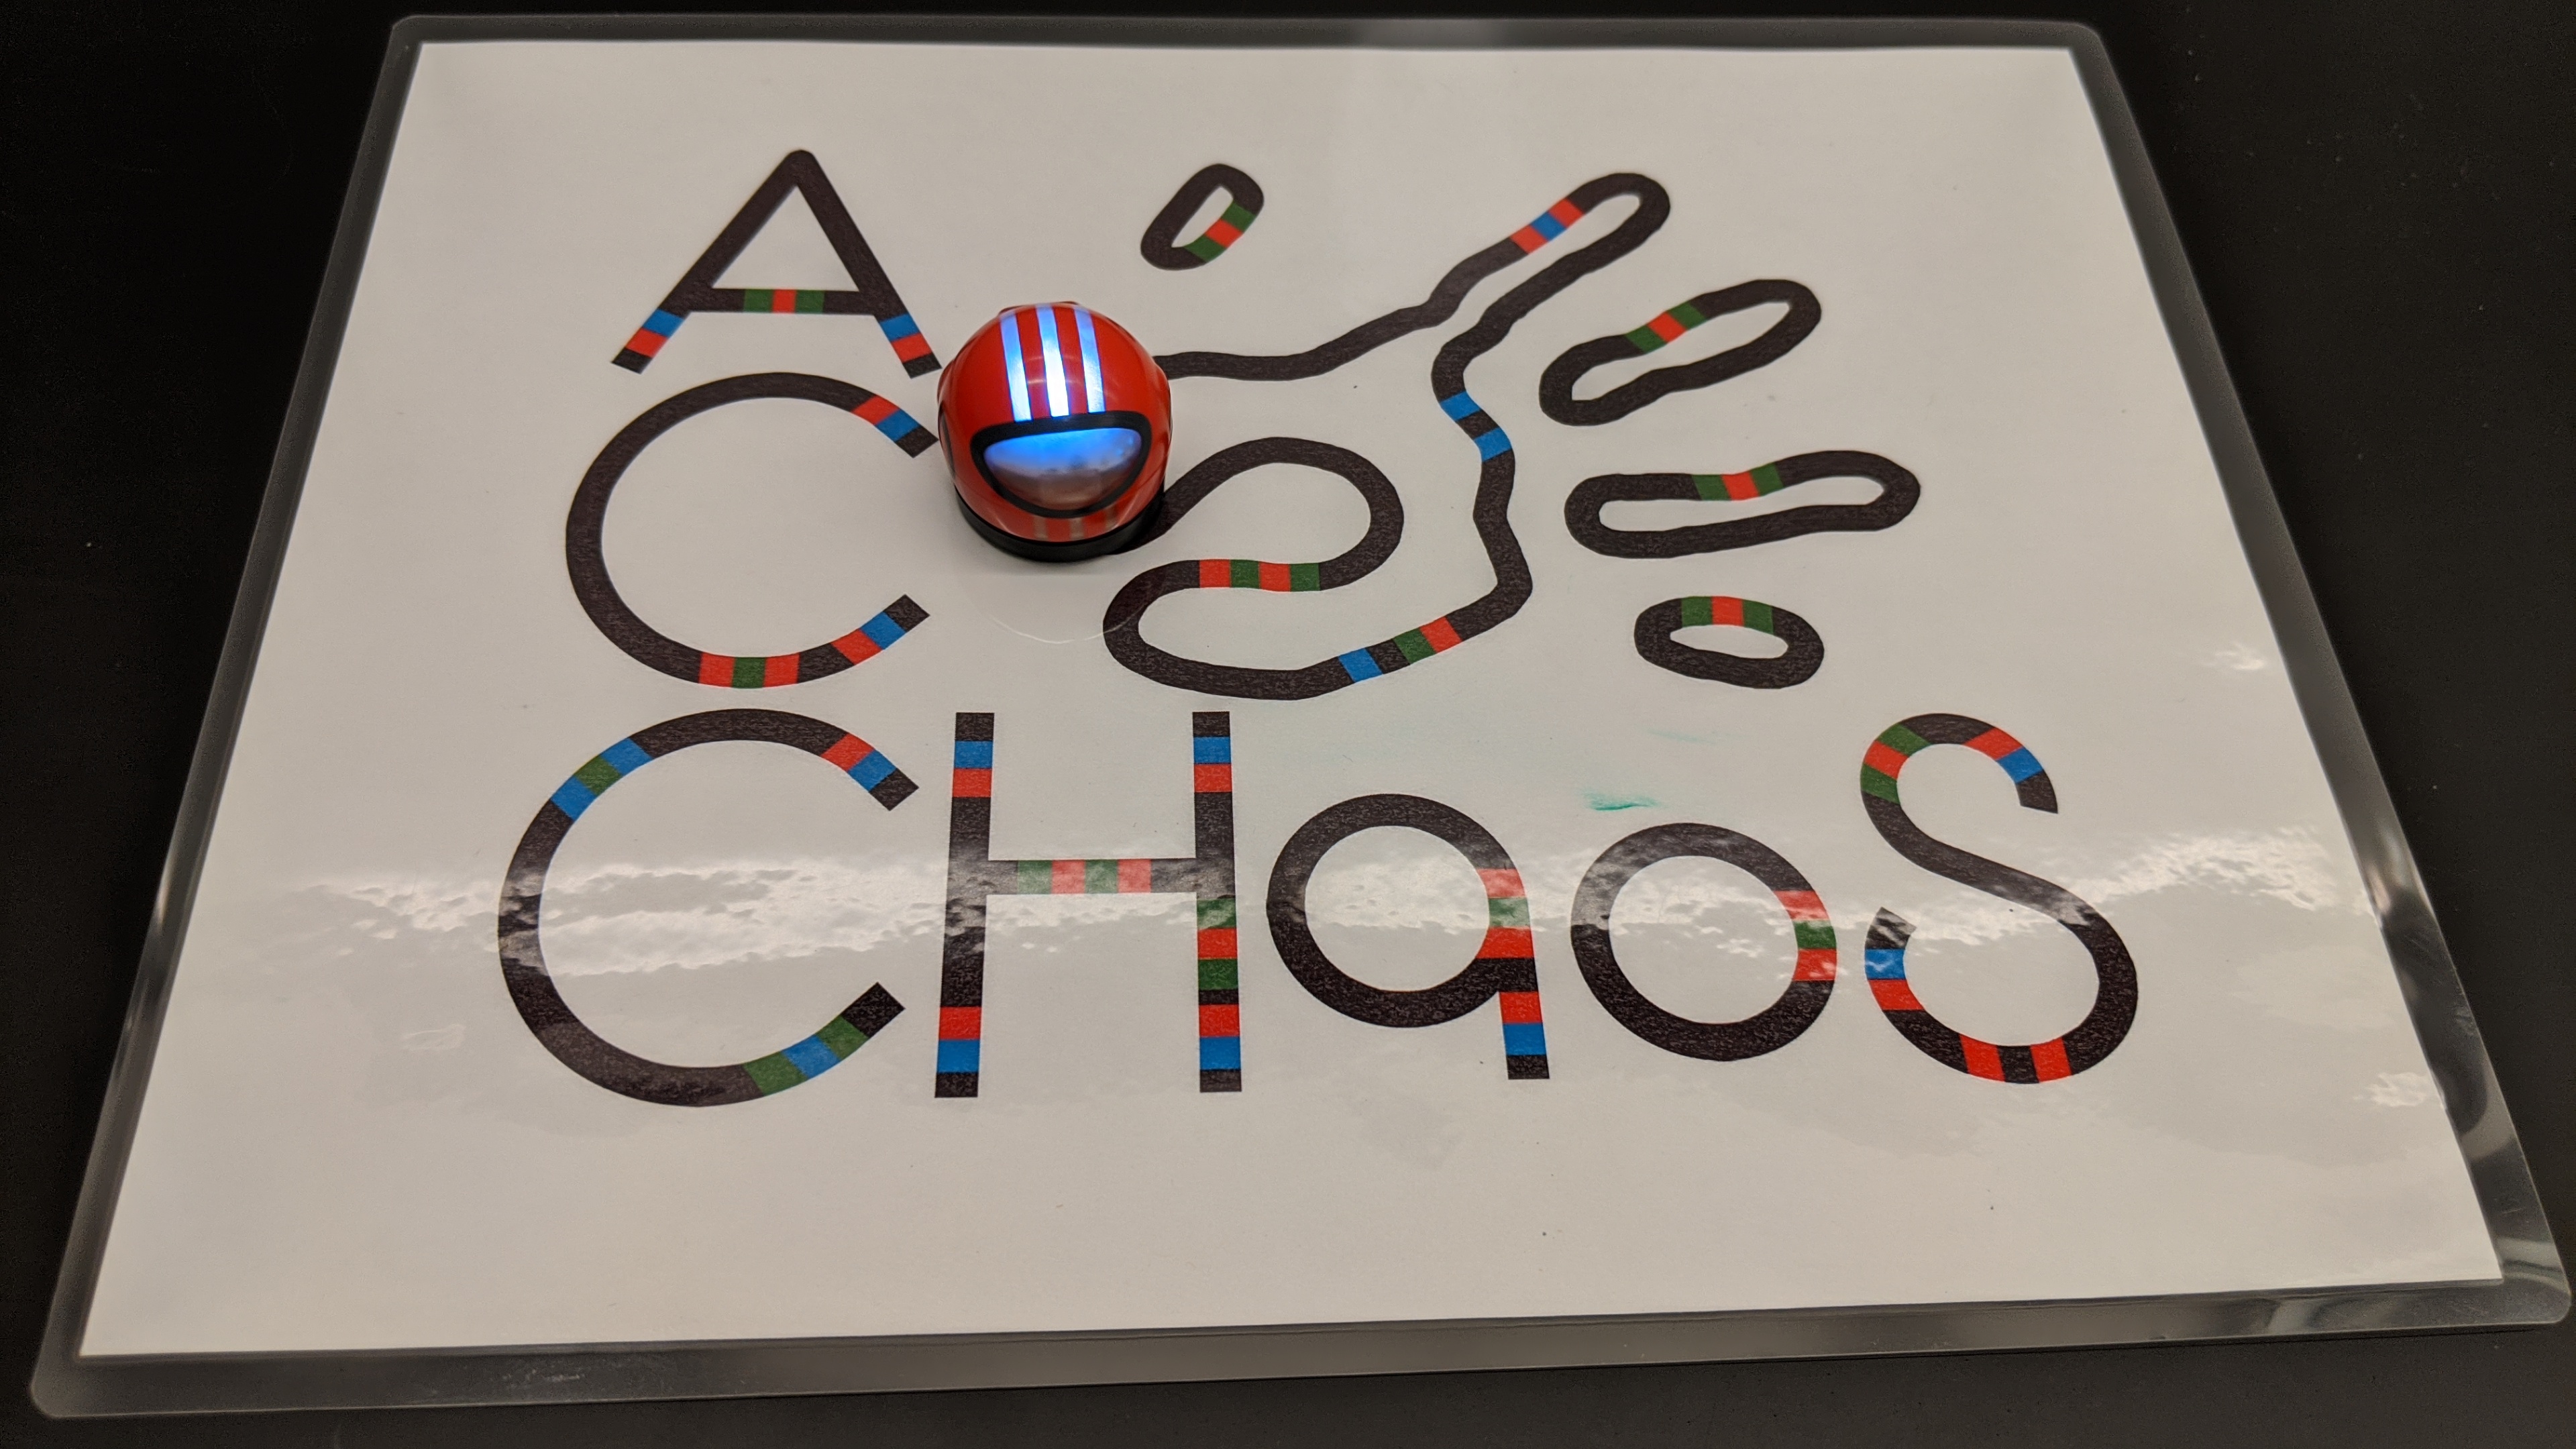 A small spherical robot moves along a picture of the ACCHaoS logo